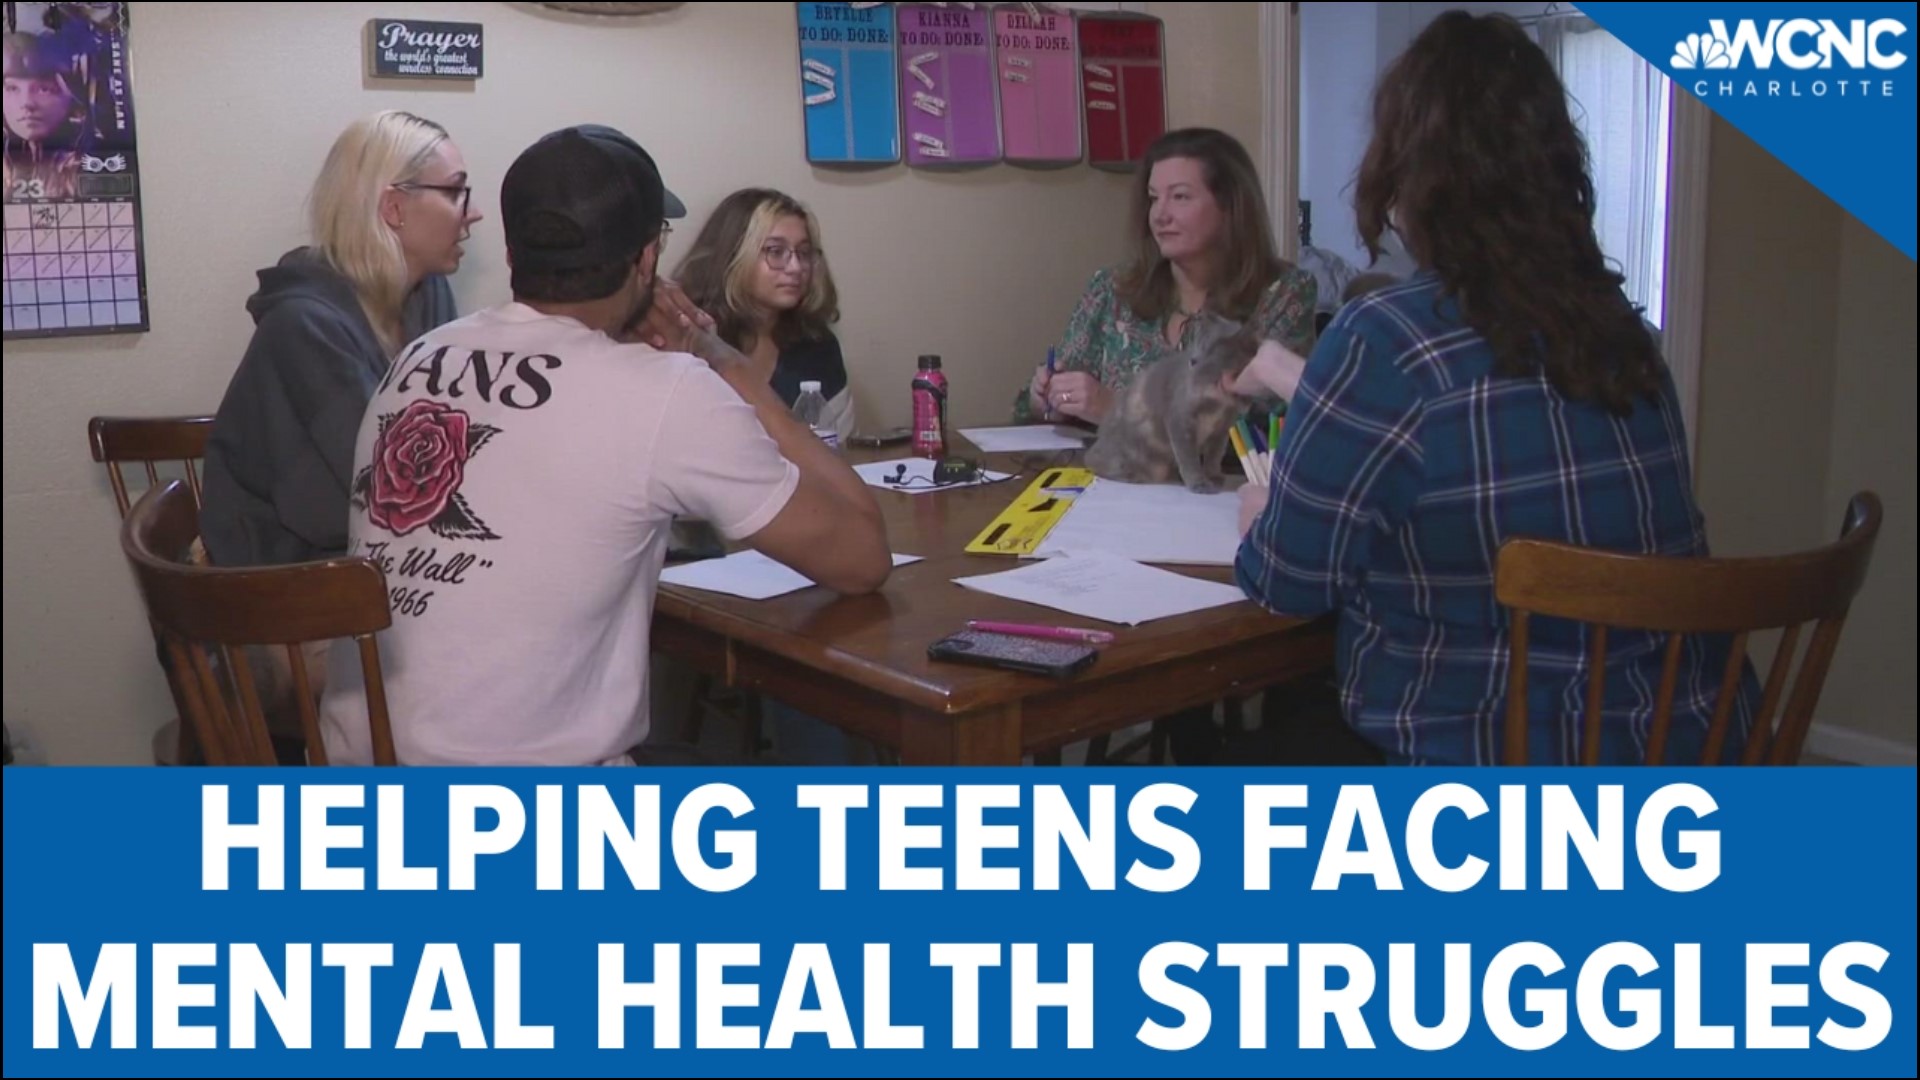 Youth Villages touts an 80% success rate in working with struggling teenagers and their families